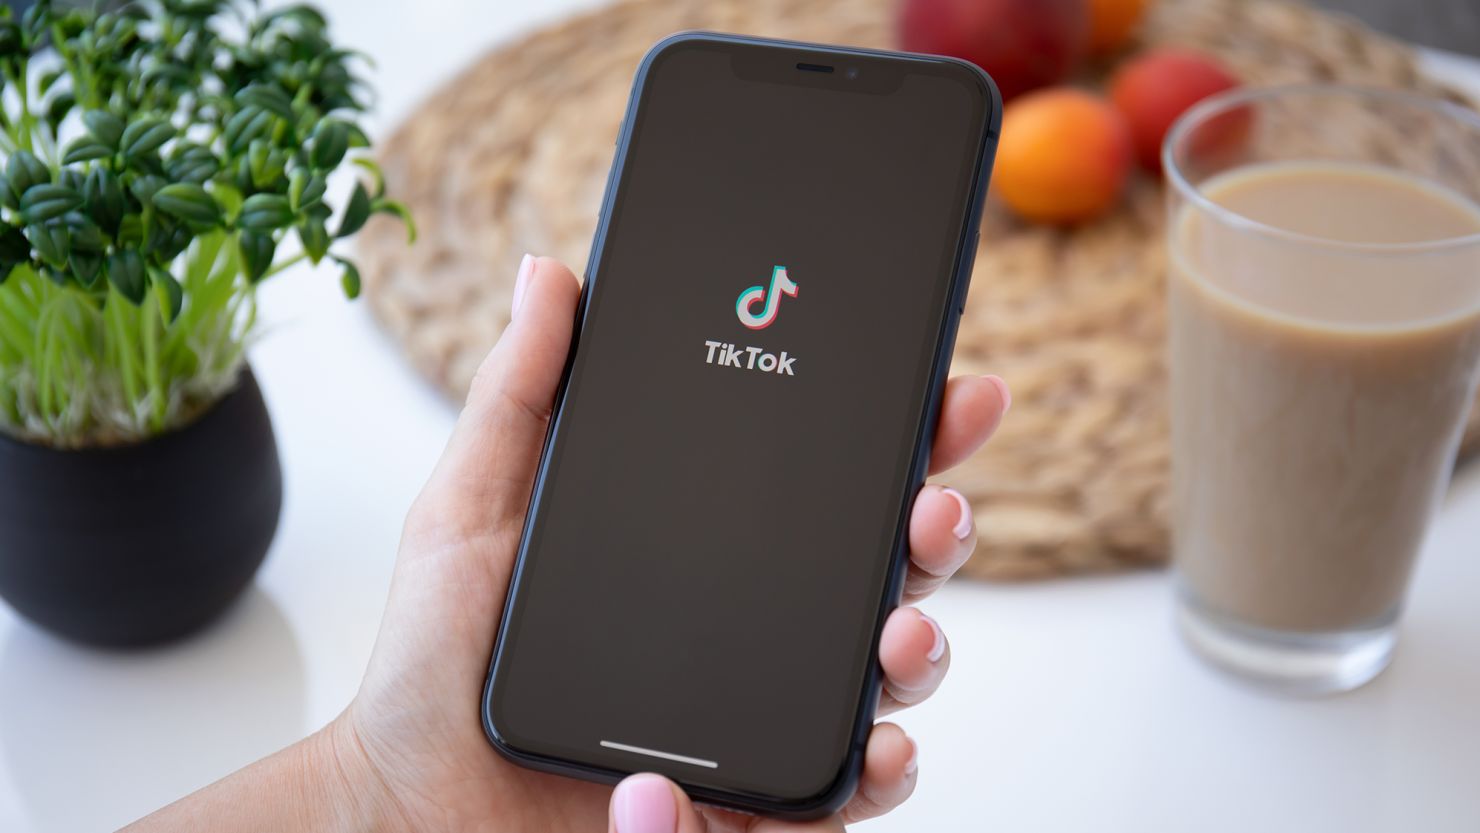 TikTok's "5 to 9 before the 9 to 5" trend has users waking up at 5 a.m. to exercise and make healthy breakfasts before work.